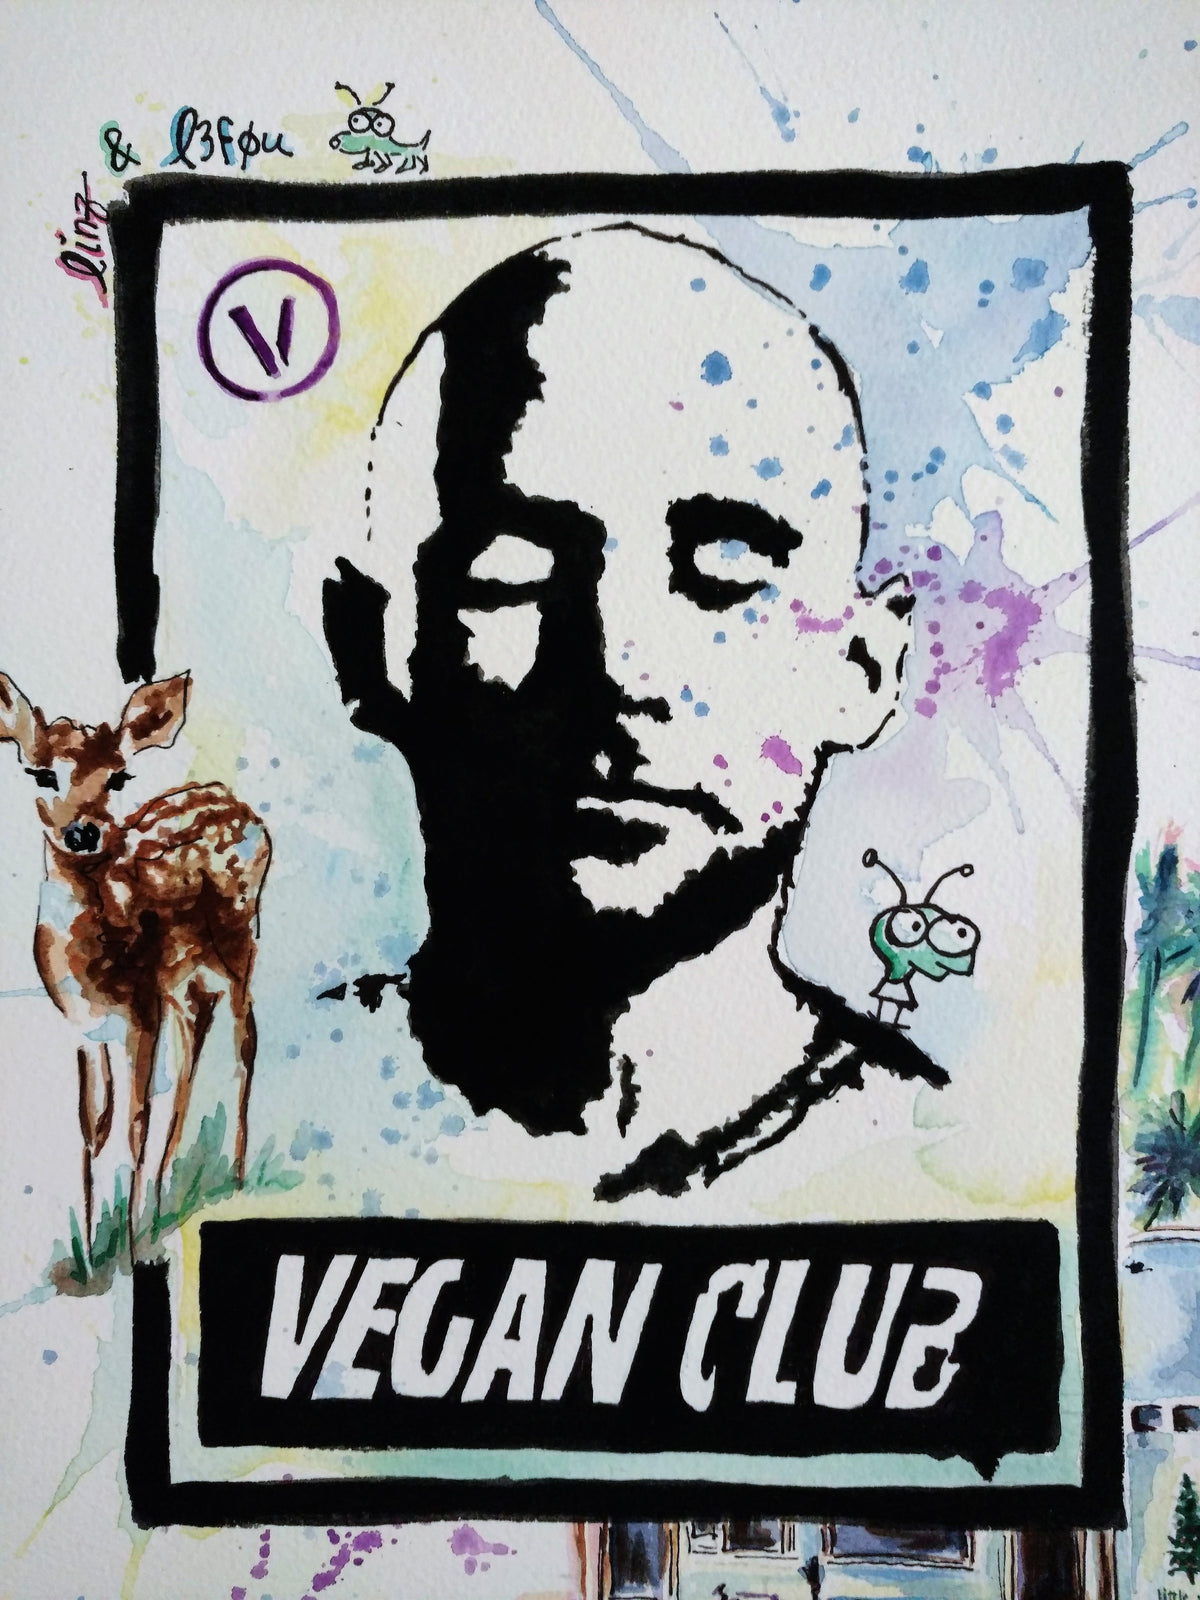 DONATED LITTLE PINE - 12x15 One of Kind Original Collab Artwork "Vegan Club" featuring Moby Signed @lindsayleigh1111 & "L3f0u" - Acrylic on paper